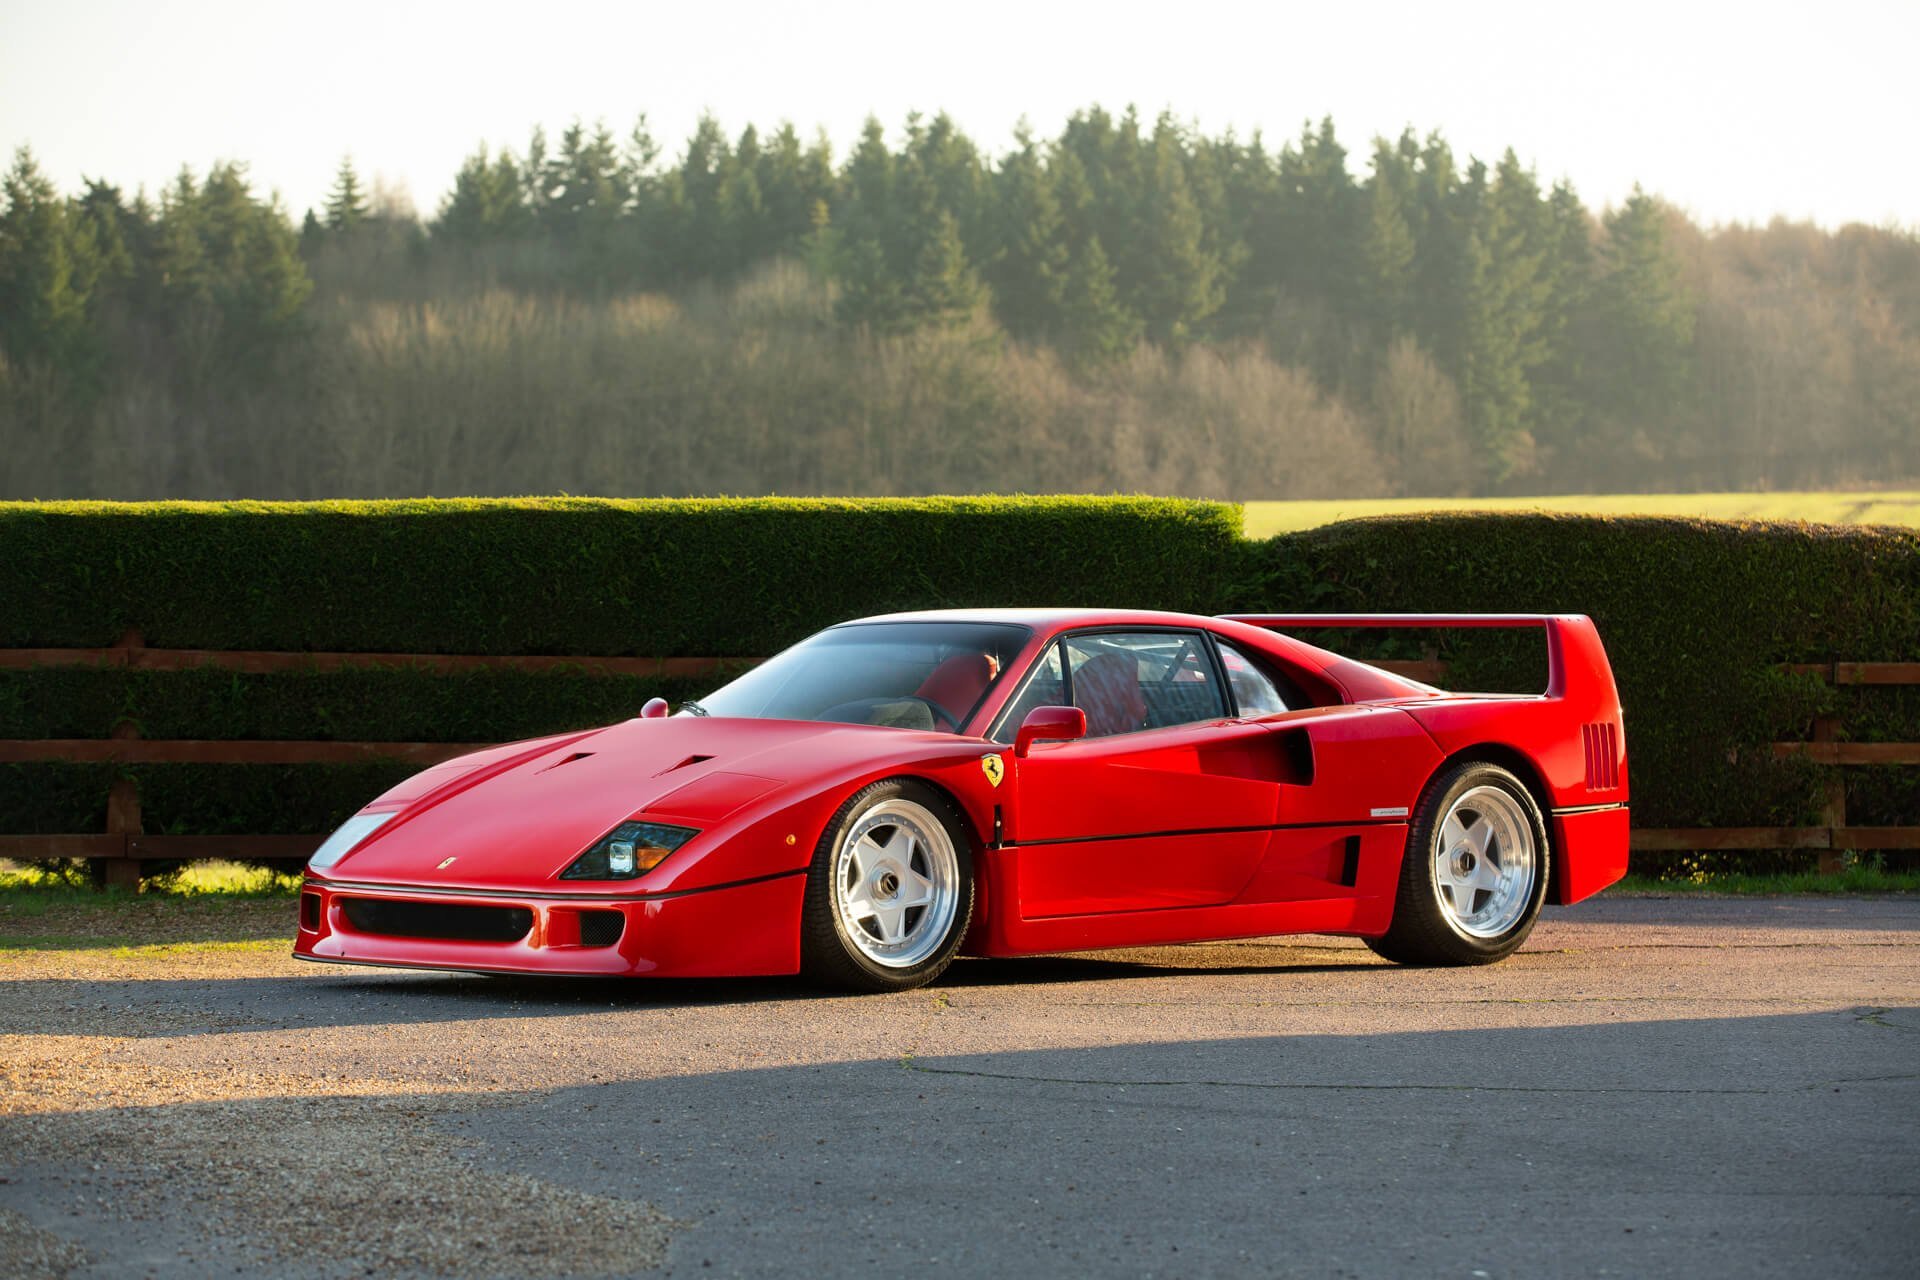 1991 Ferrari F40  482 miles from new Two owners from 